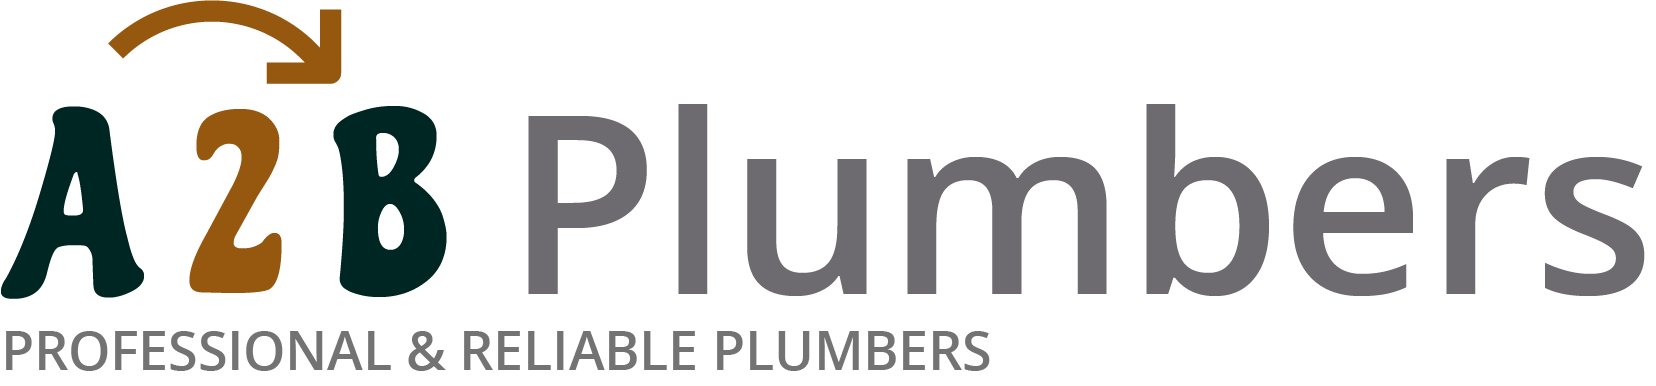 If you need a boiler installed, a radiator repaired or a leaking tap fixed, call us now - we provide services for properties in Chippenham and the local area.